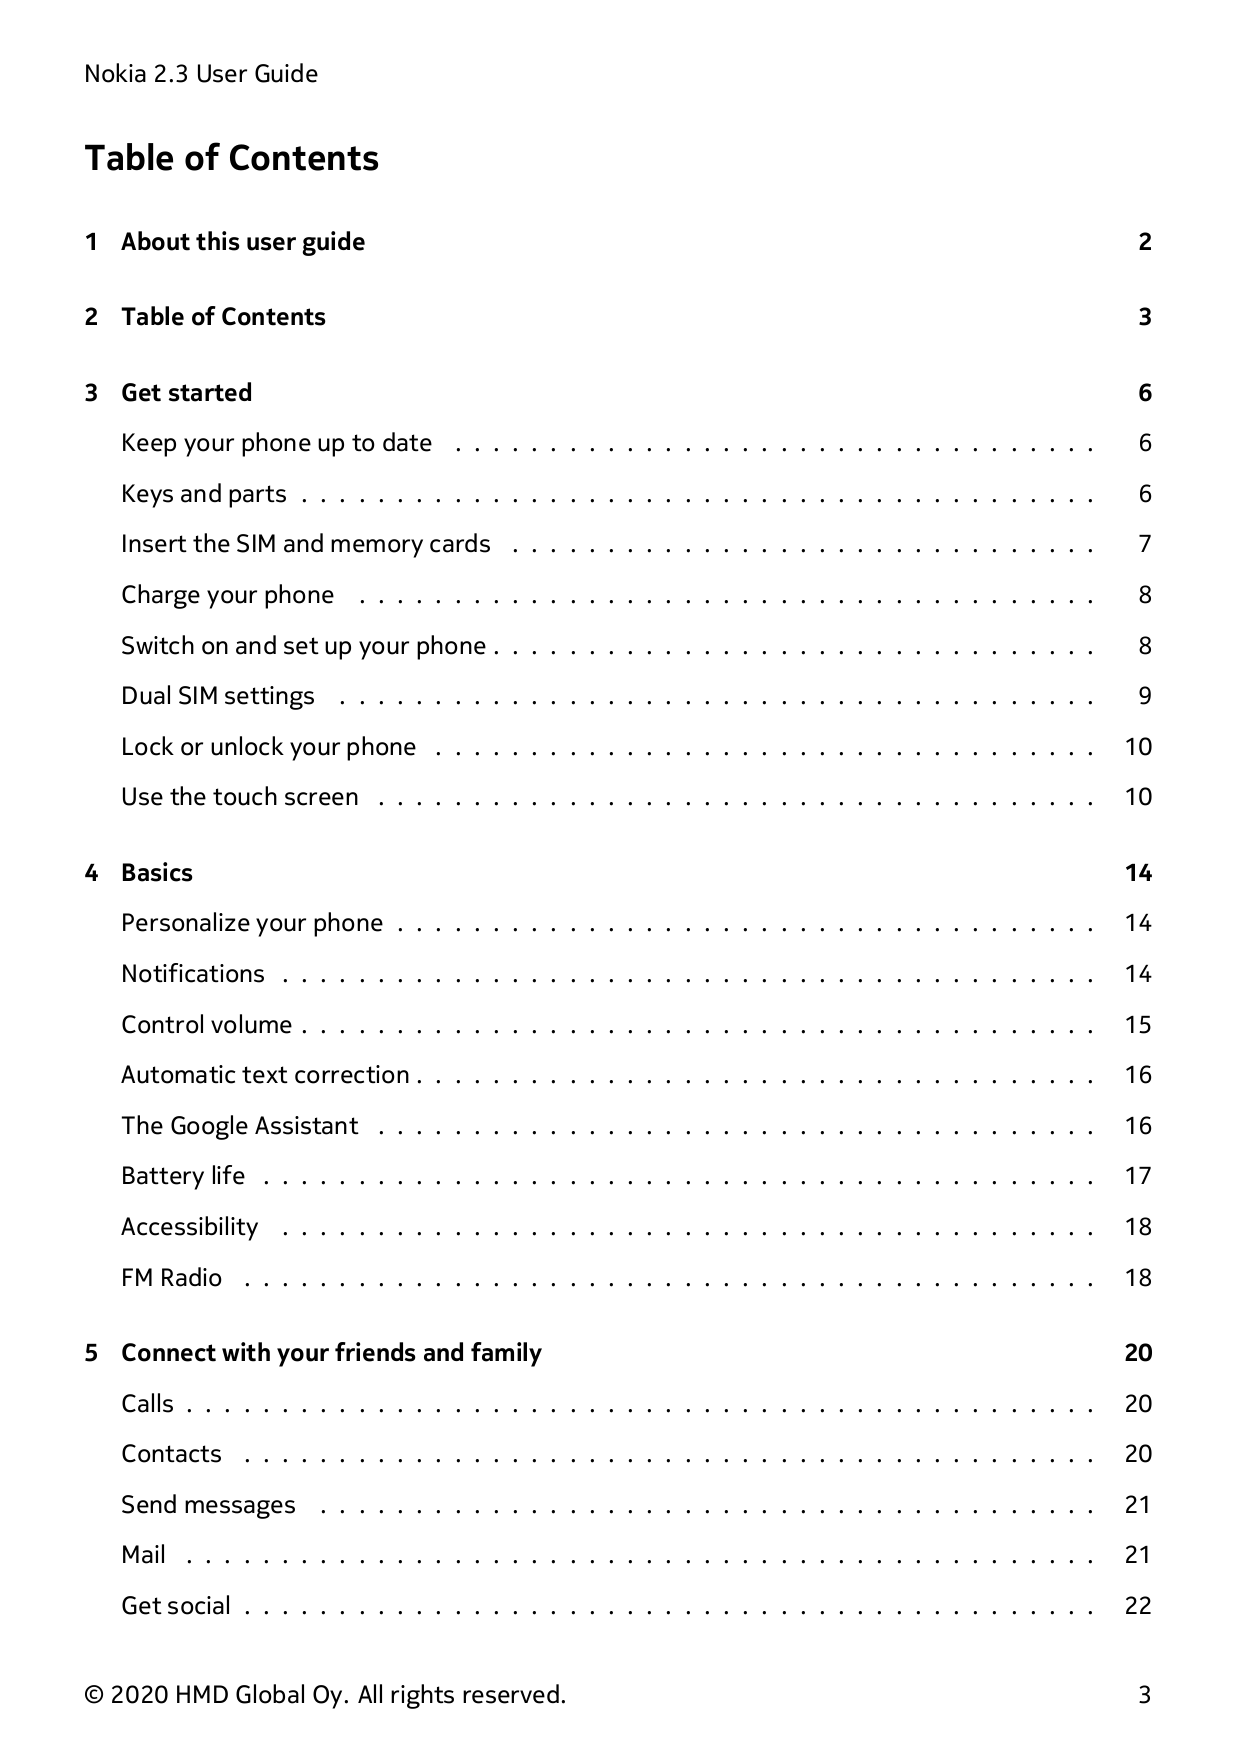 Nokia 2.3 User GuideTable of Contents1 About this user guide22 Table of Contents33 Get started6Keep your phone up to date . . . 